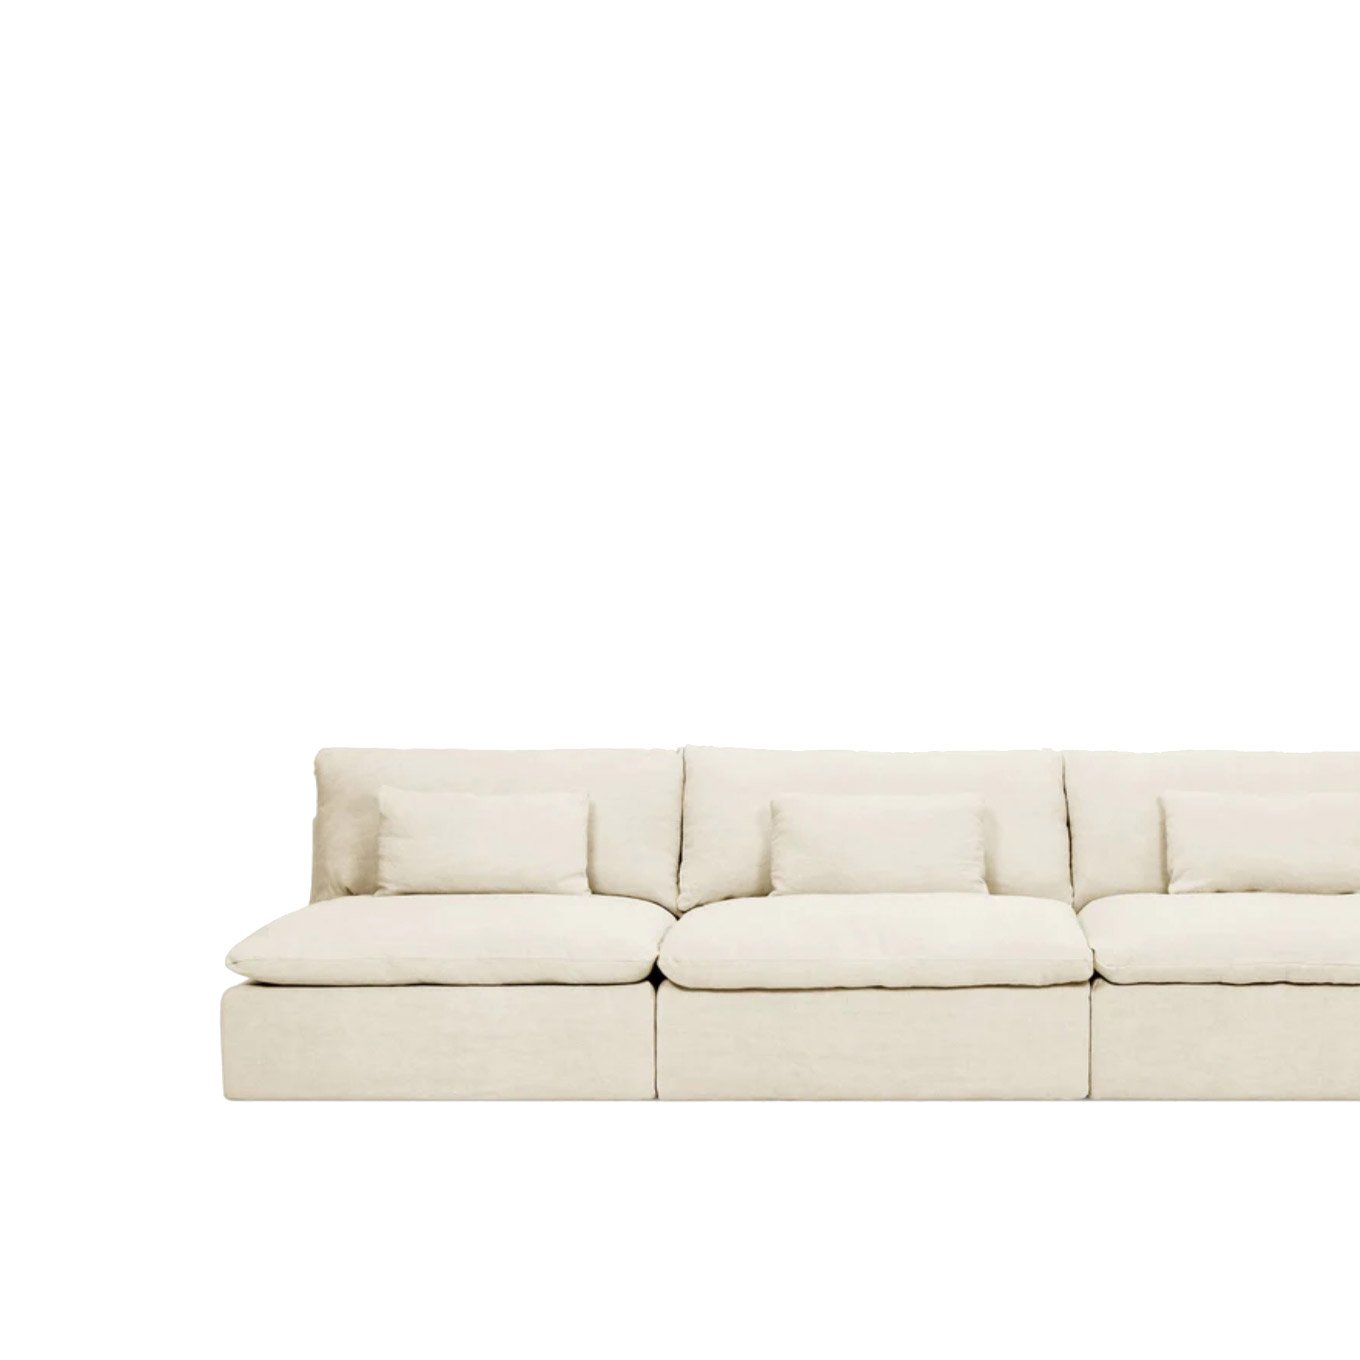 Aria Grande Sectional featured in New York Times Wirecutter